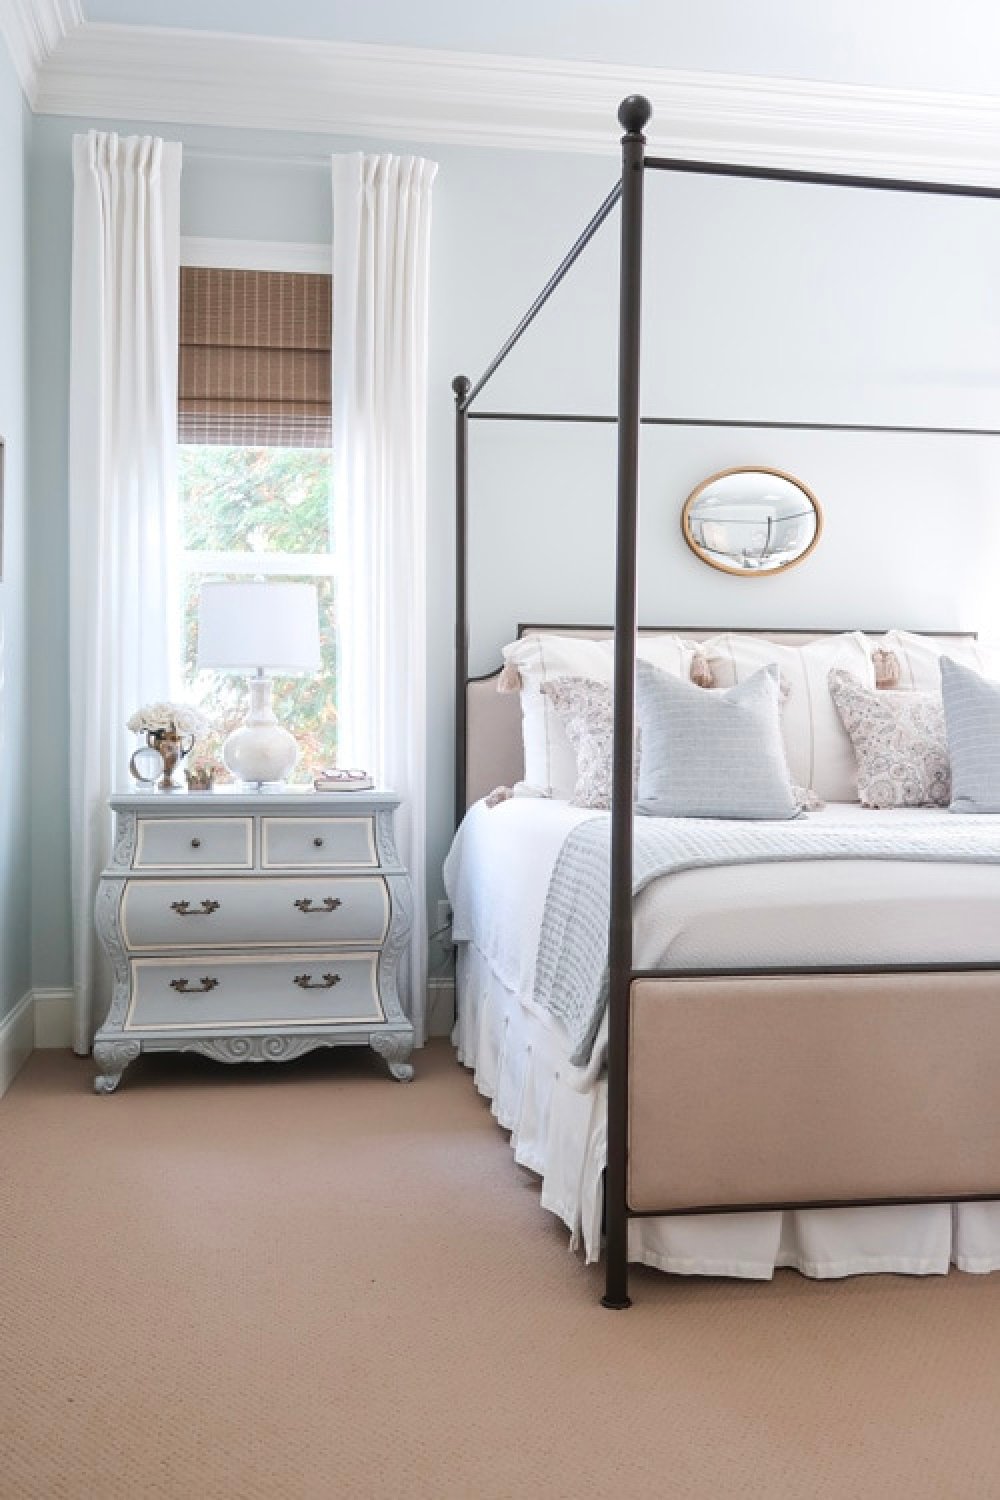 Bedroom with four poster bed, french style nightstand and walls painted Benjamin Moore Quiet Moments